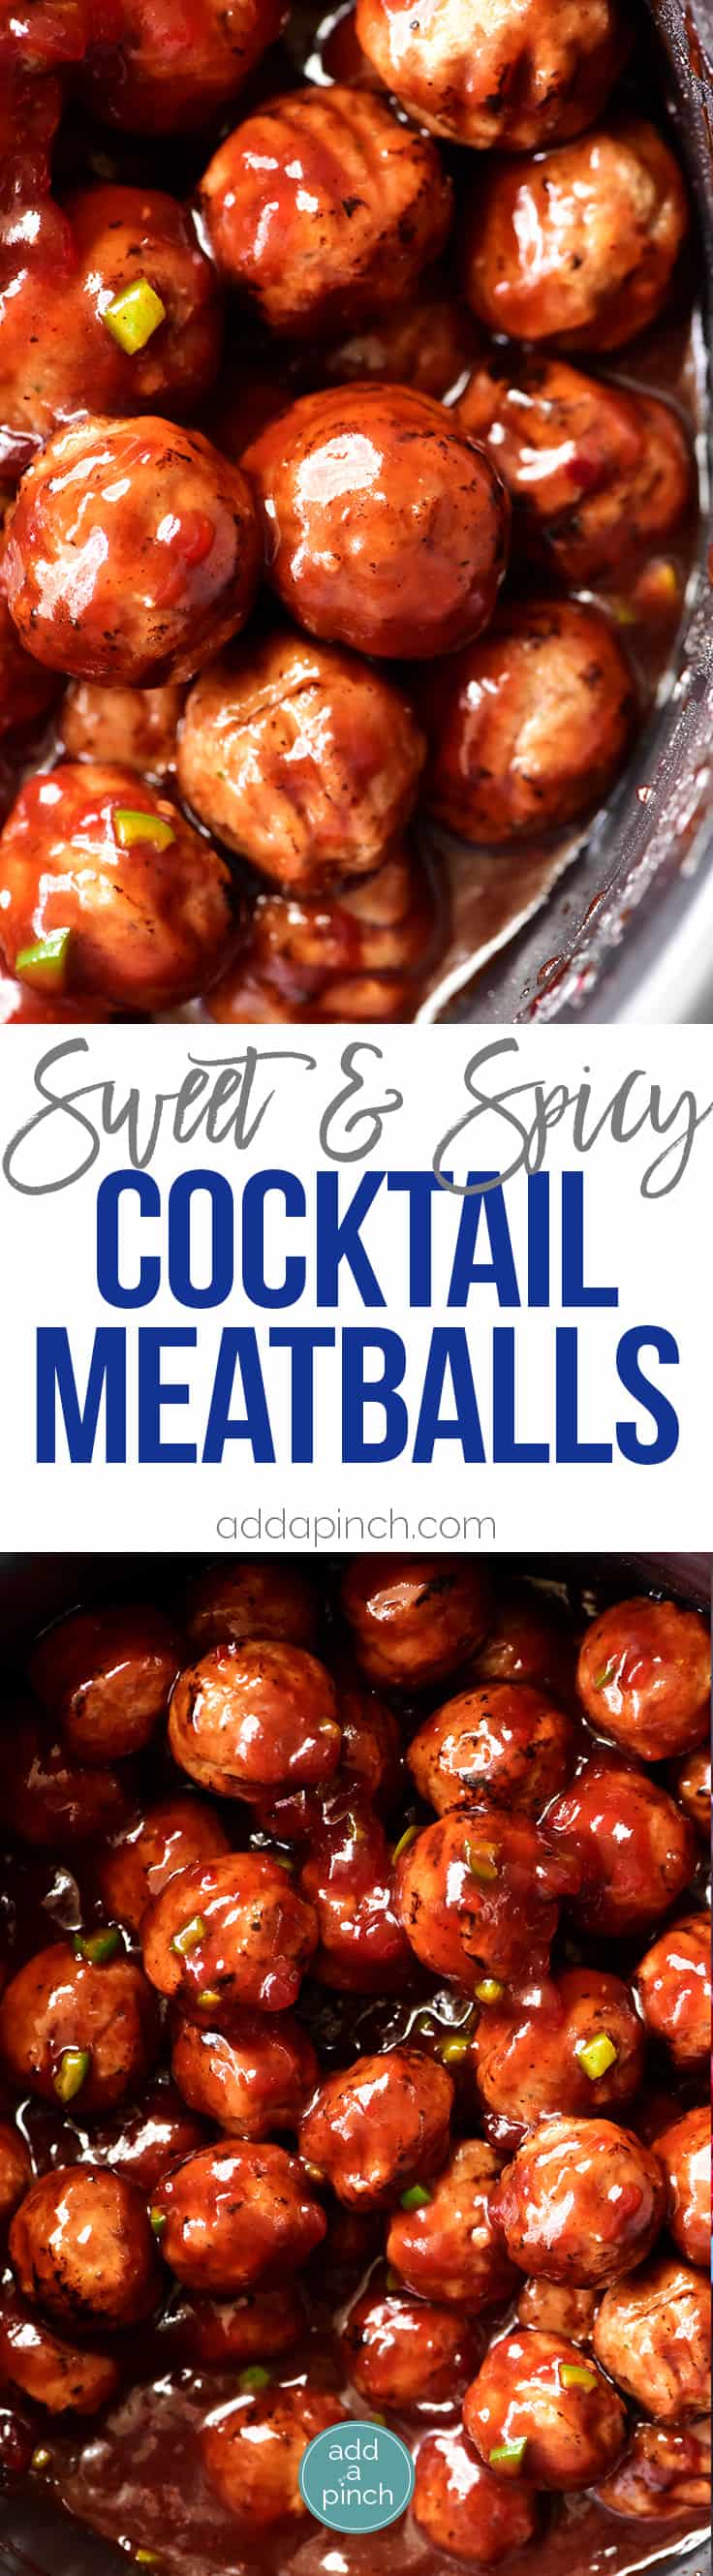 Sweet and Spicy Cranberry Cocktail Meatballs Recipe - An update on a classic party favorite, these sweet and spicy cranberry cocktail meatballs are always a hit! // addapinch.com